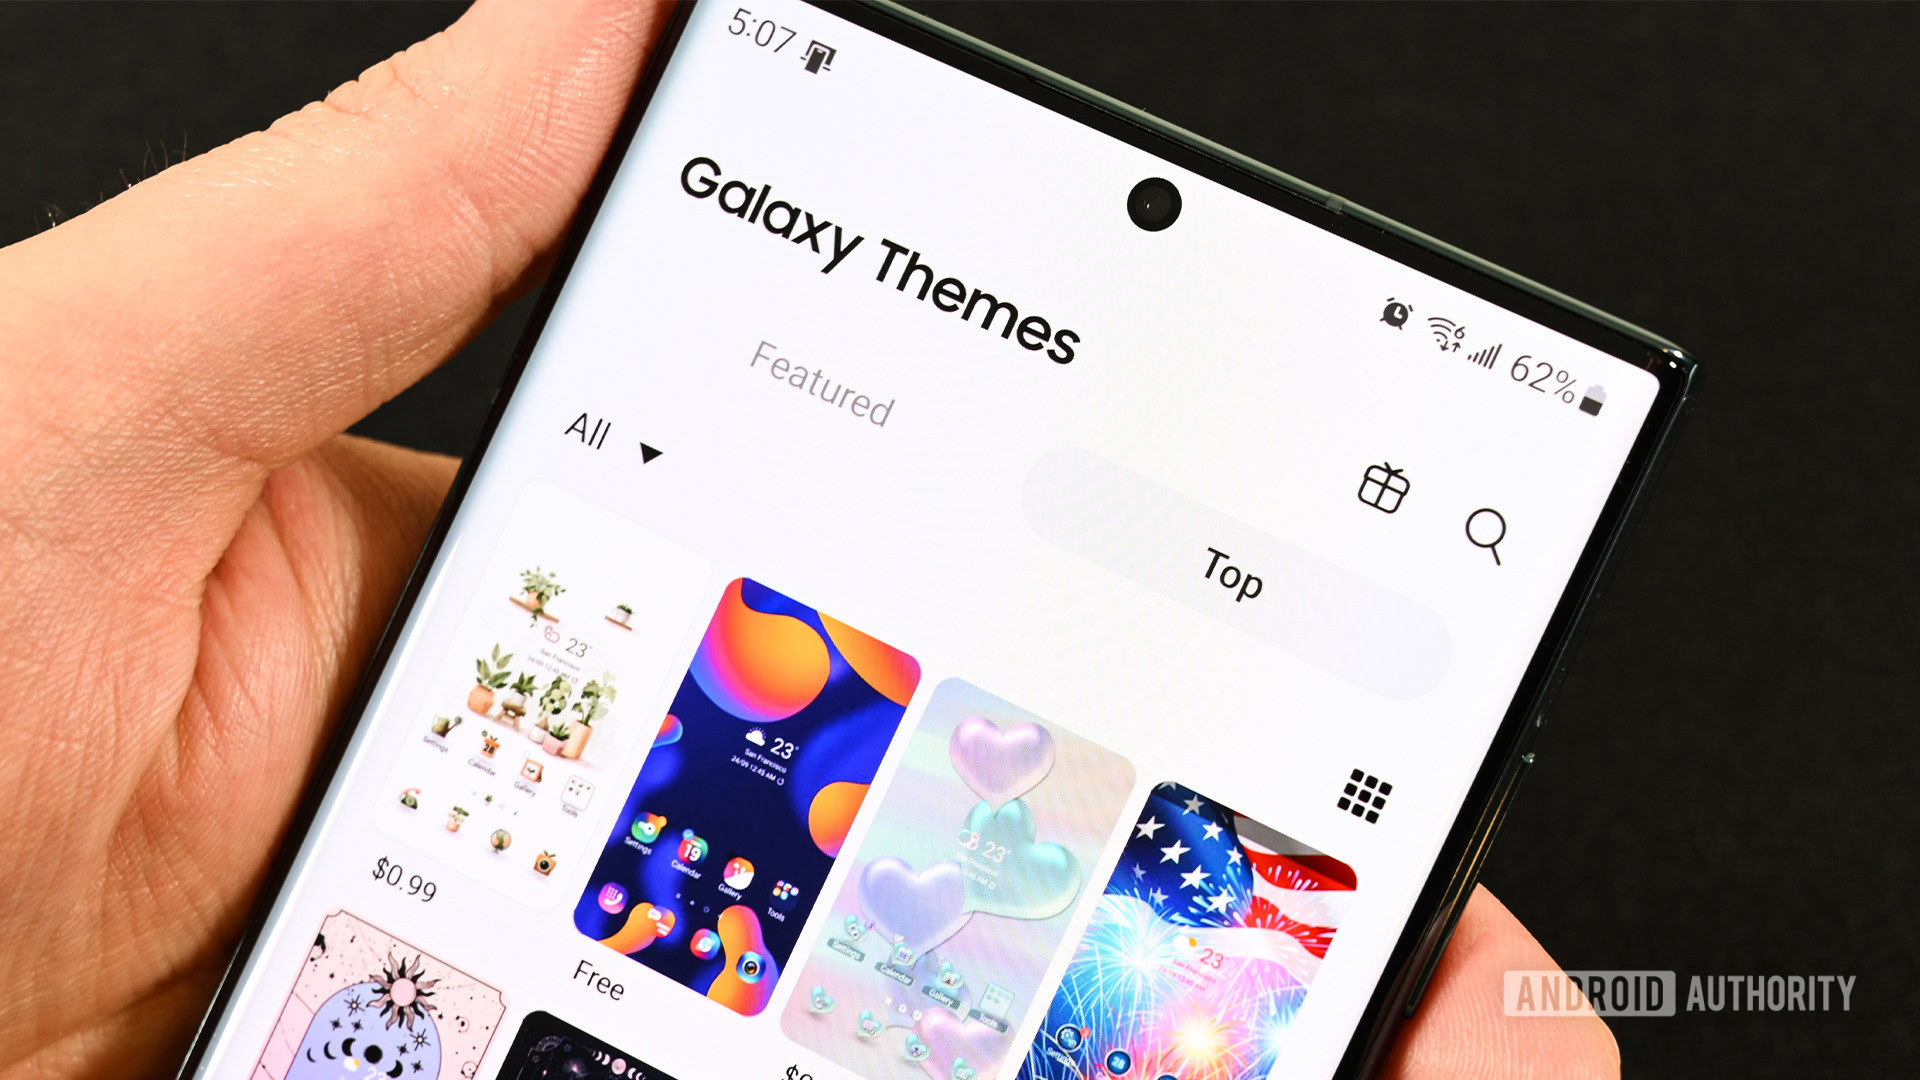 samsung mobile themes and wallpapers